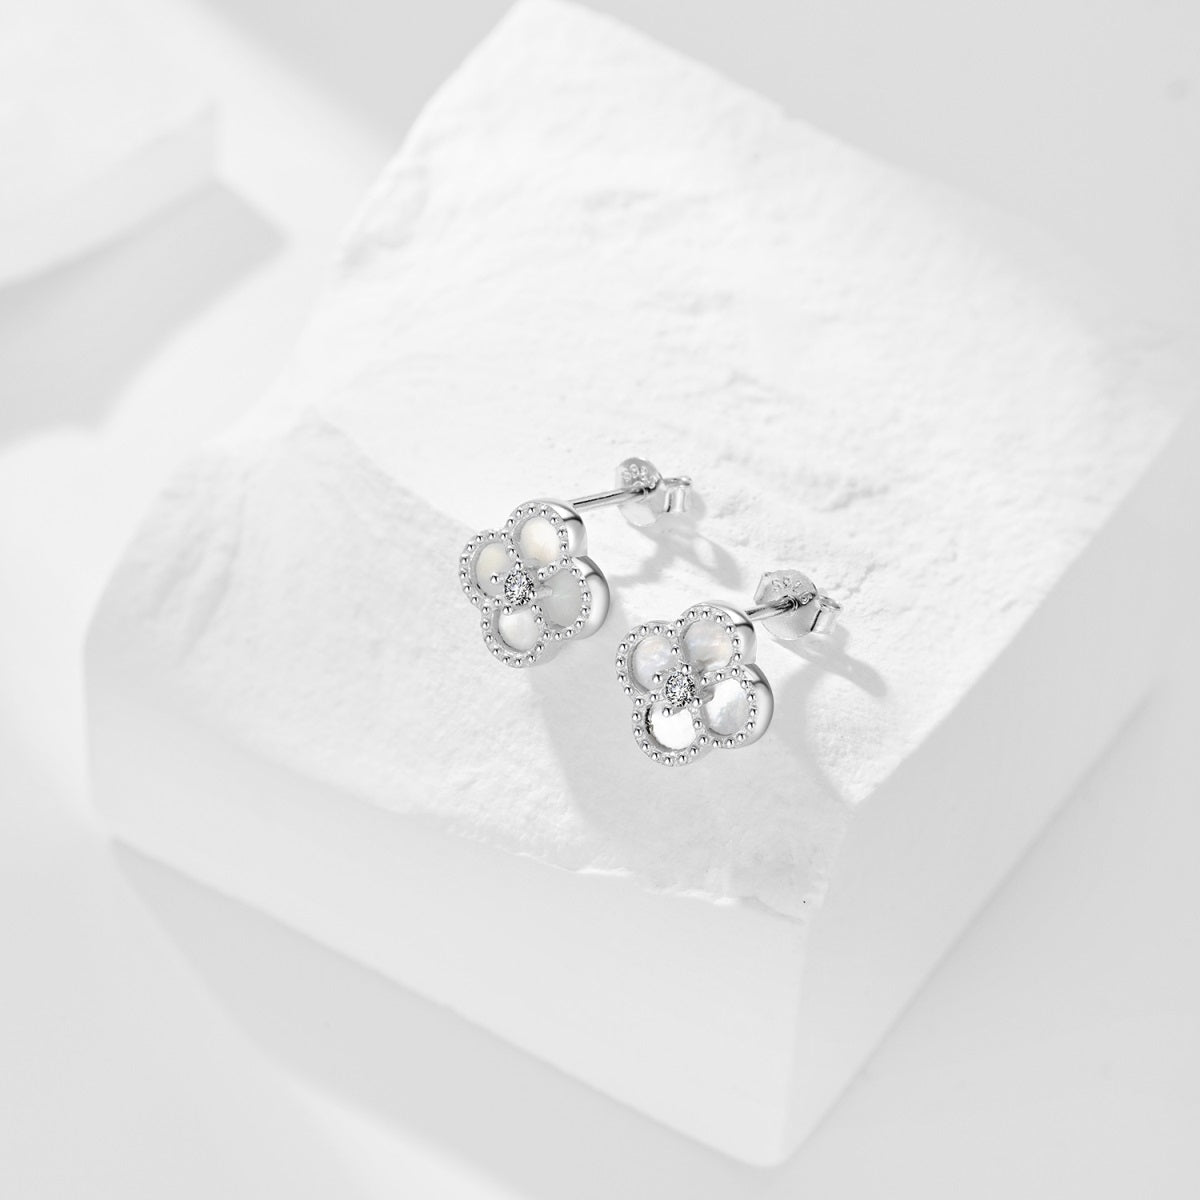 Women's 925 Silver Earrings Clover With Zircons - Jewelry - EM Accessories - 925 silver - new - SILVER-0018-ER